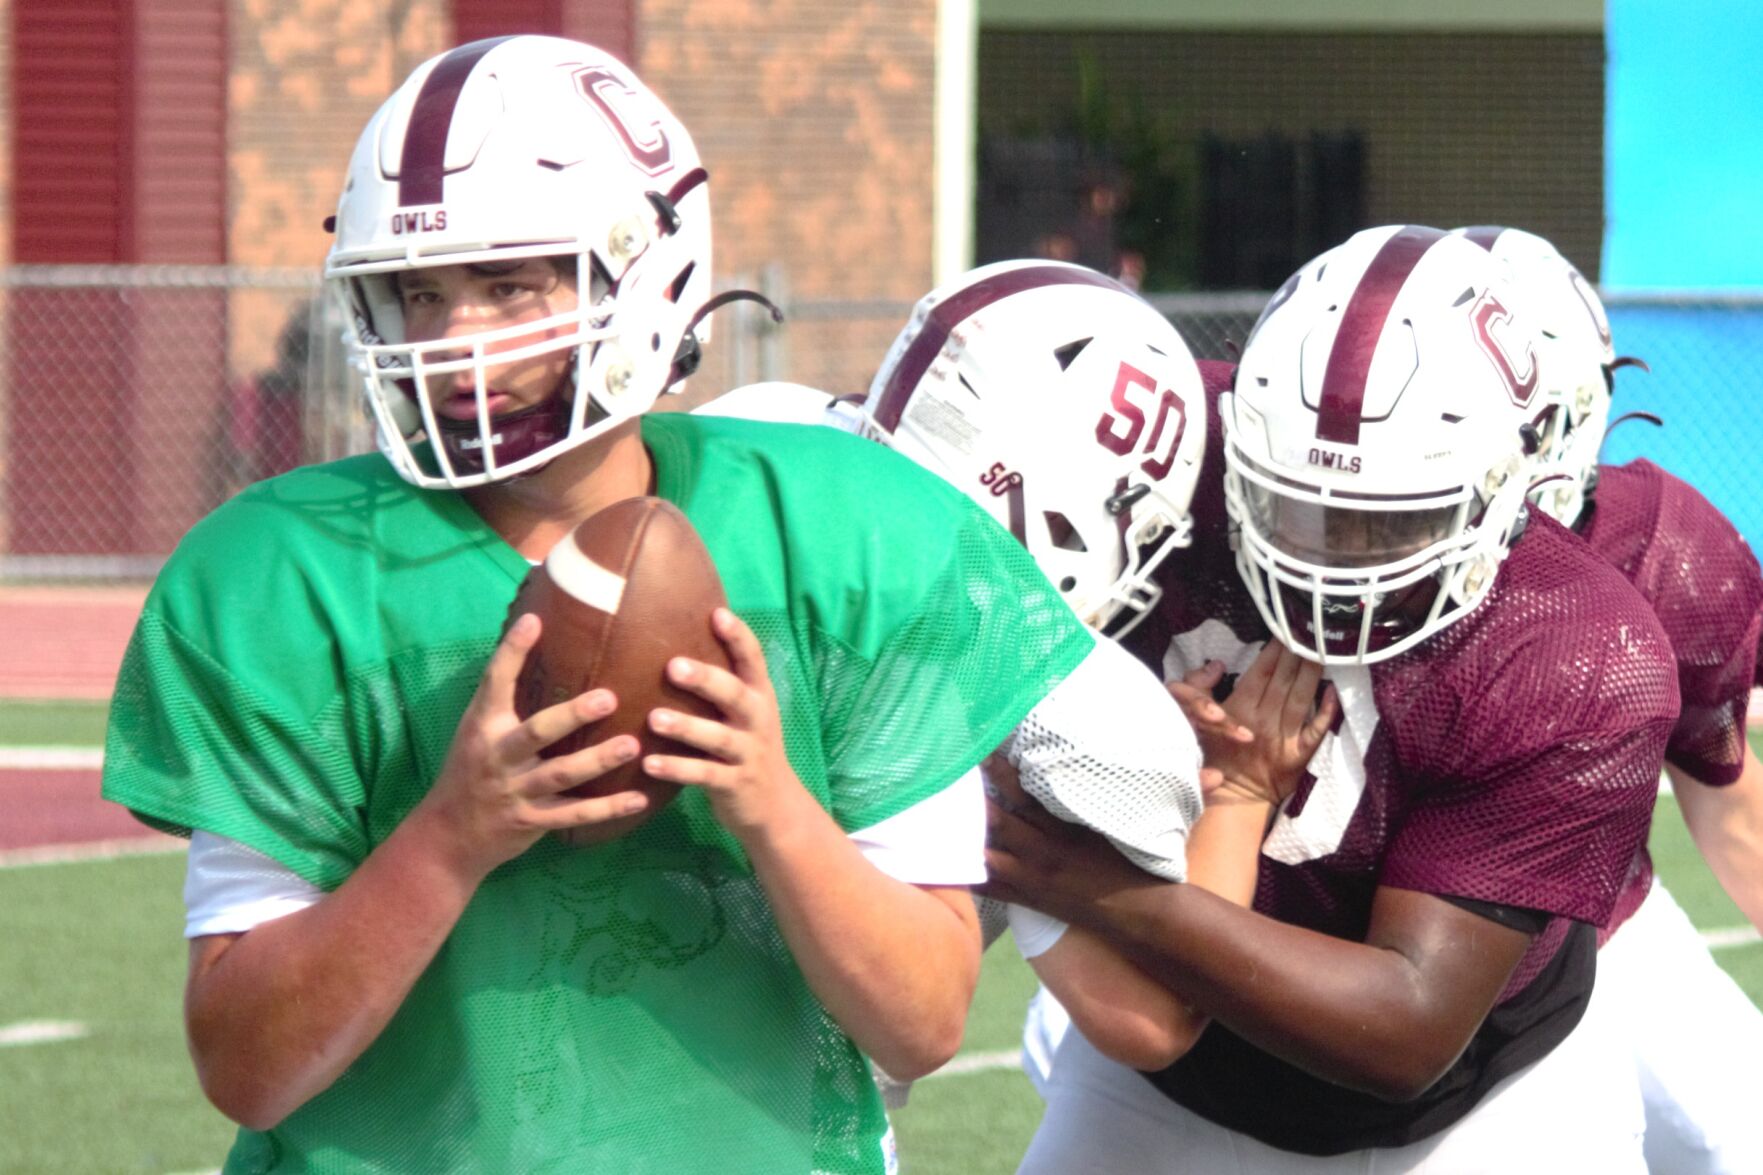 Chalmette High School Senior Ethan Couvillon Makes a Remarkable Transition from Offensive Lineman to Standout Quarterback